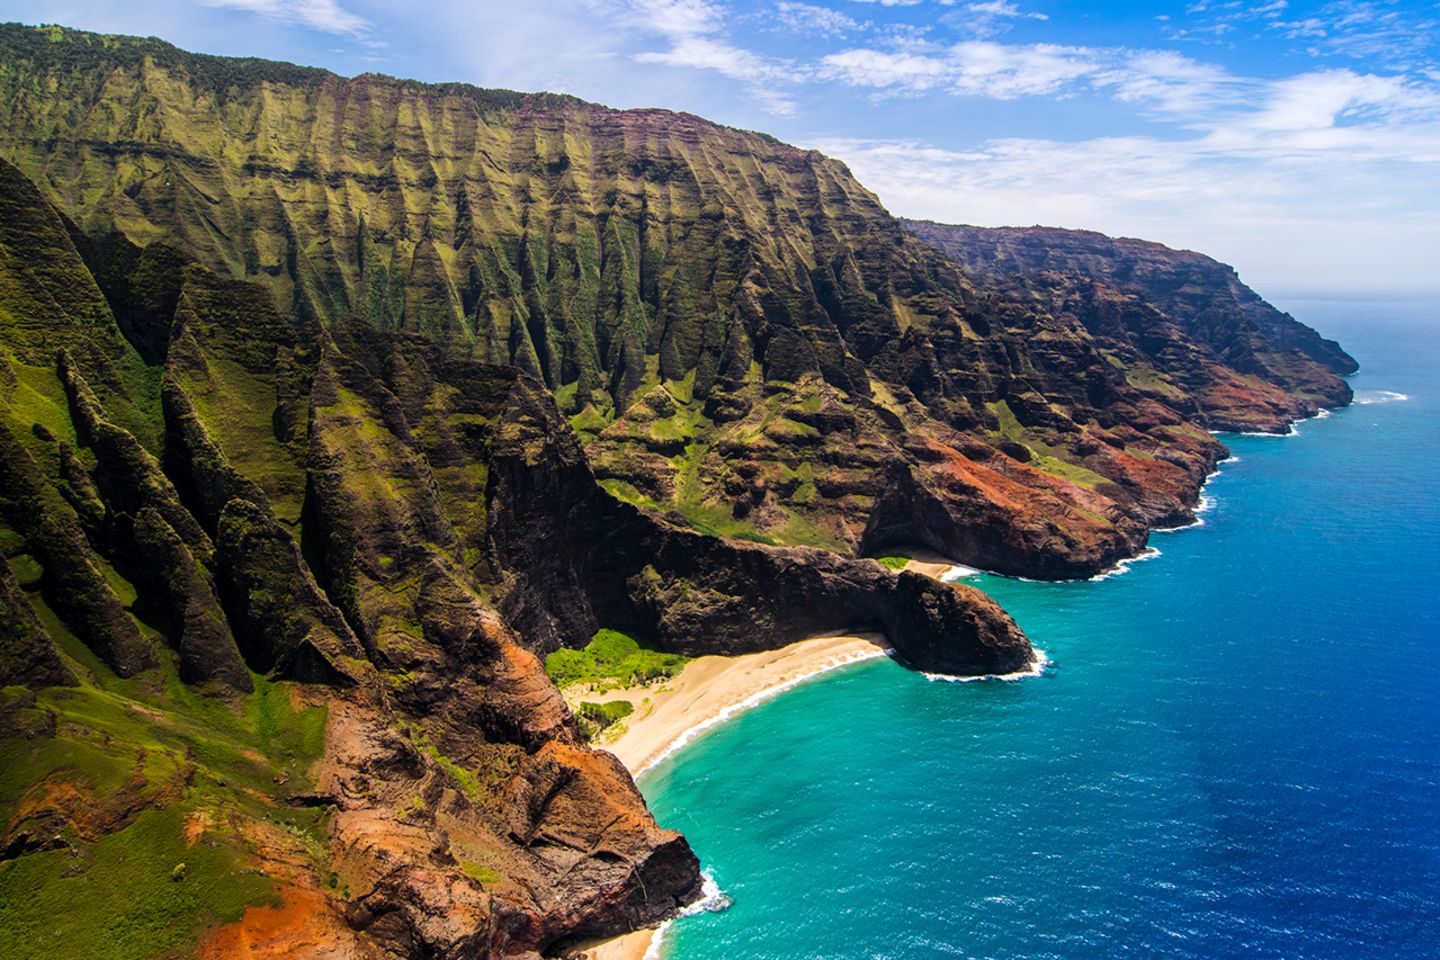 Can You Match These Extraordinary Natural Features to Their Respective Countries? Napali Coast, Kauai, Hawaii